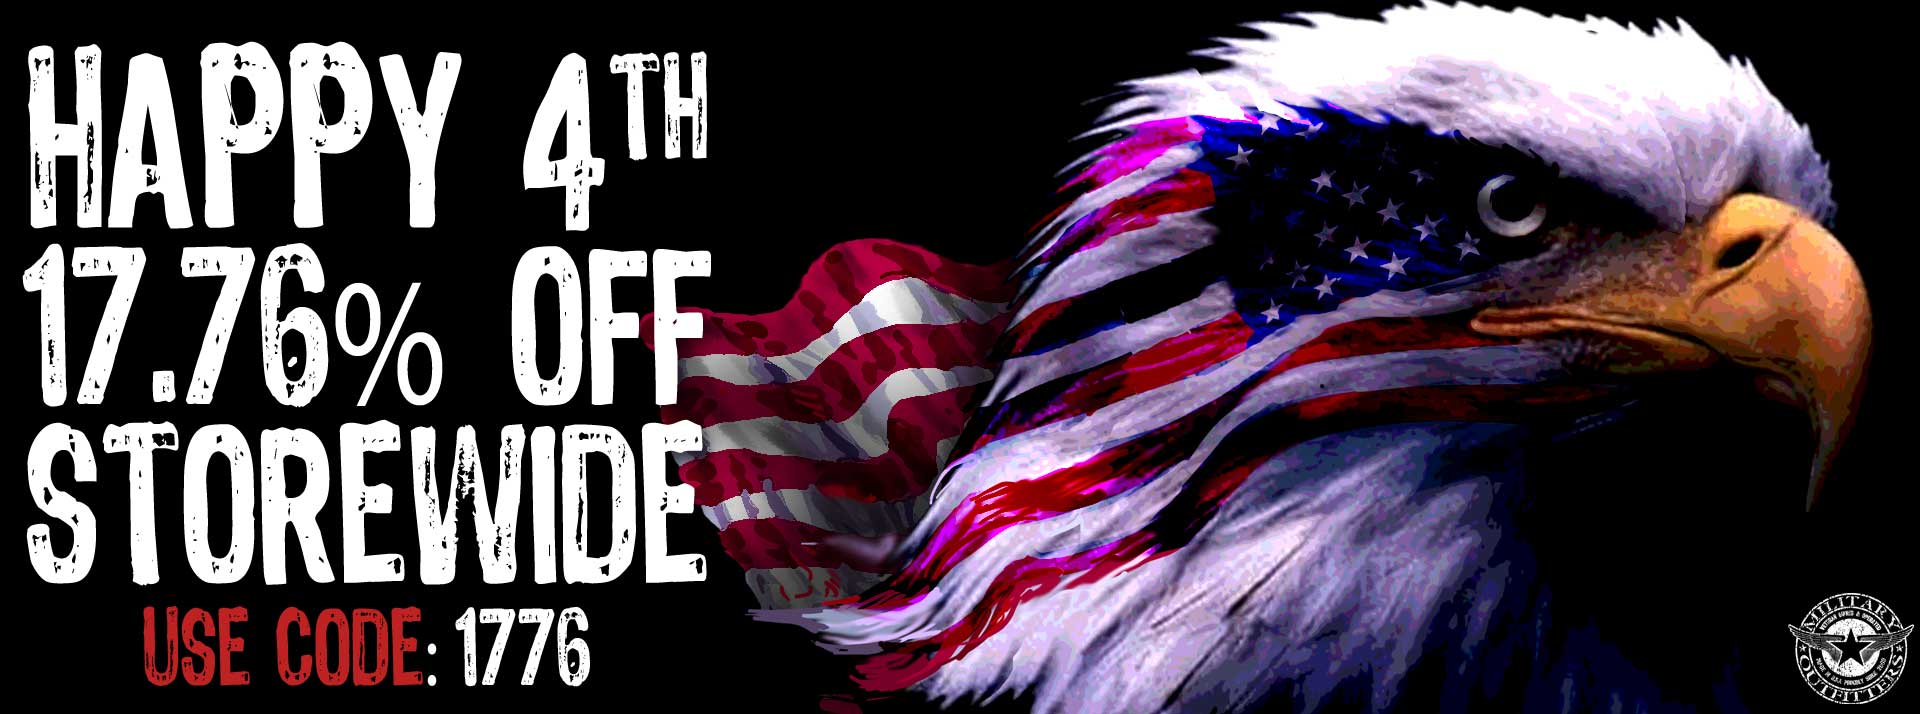 Military Outfitters 4th of July Sale